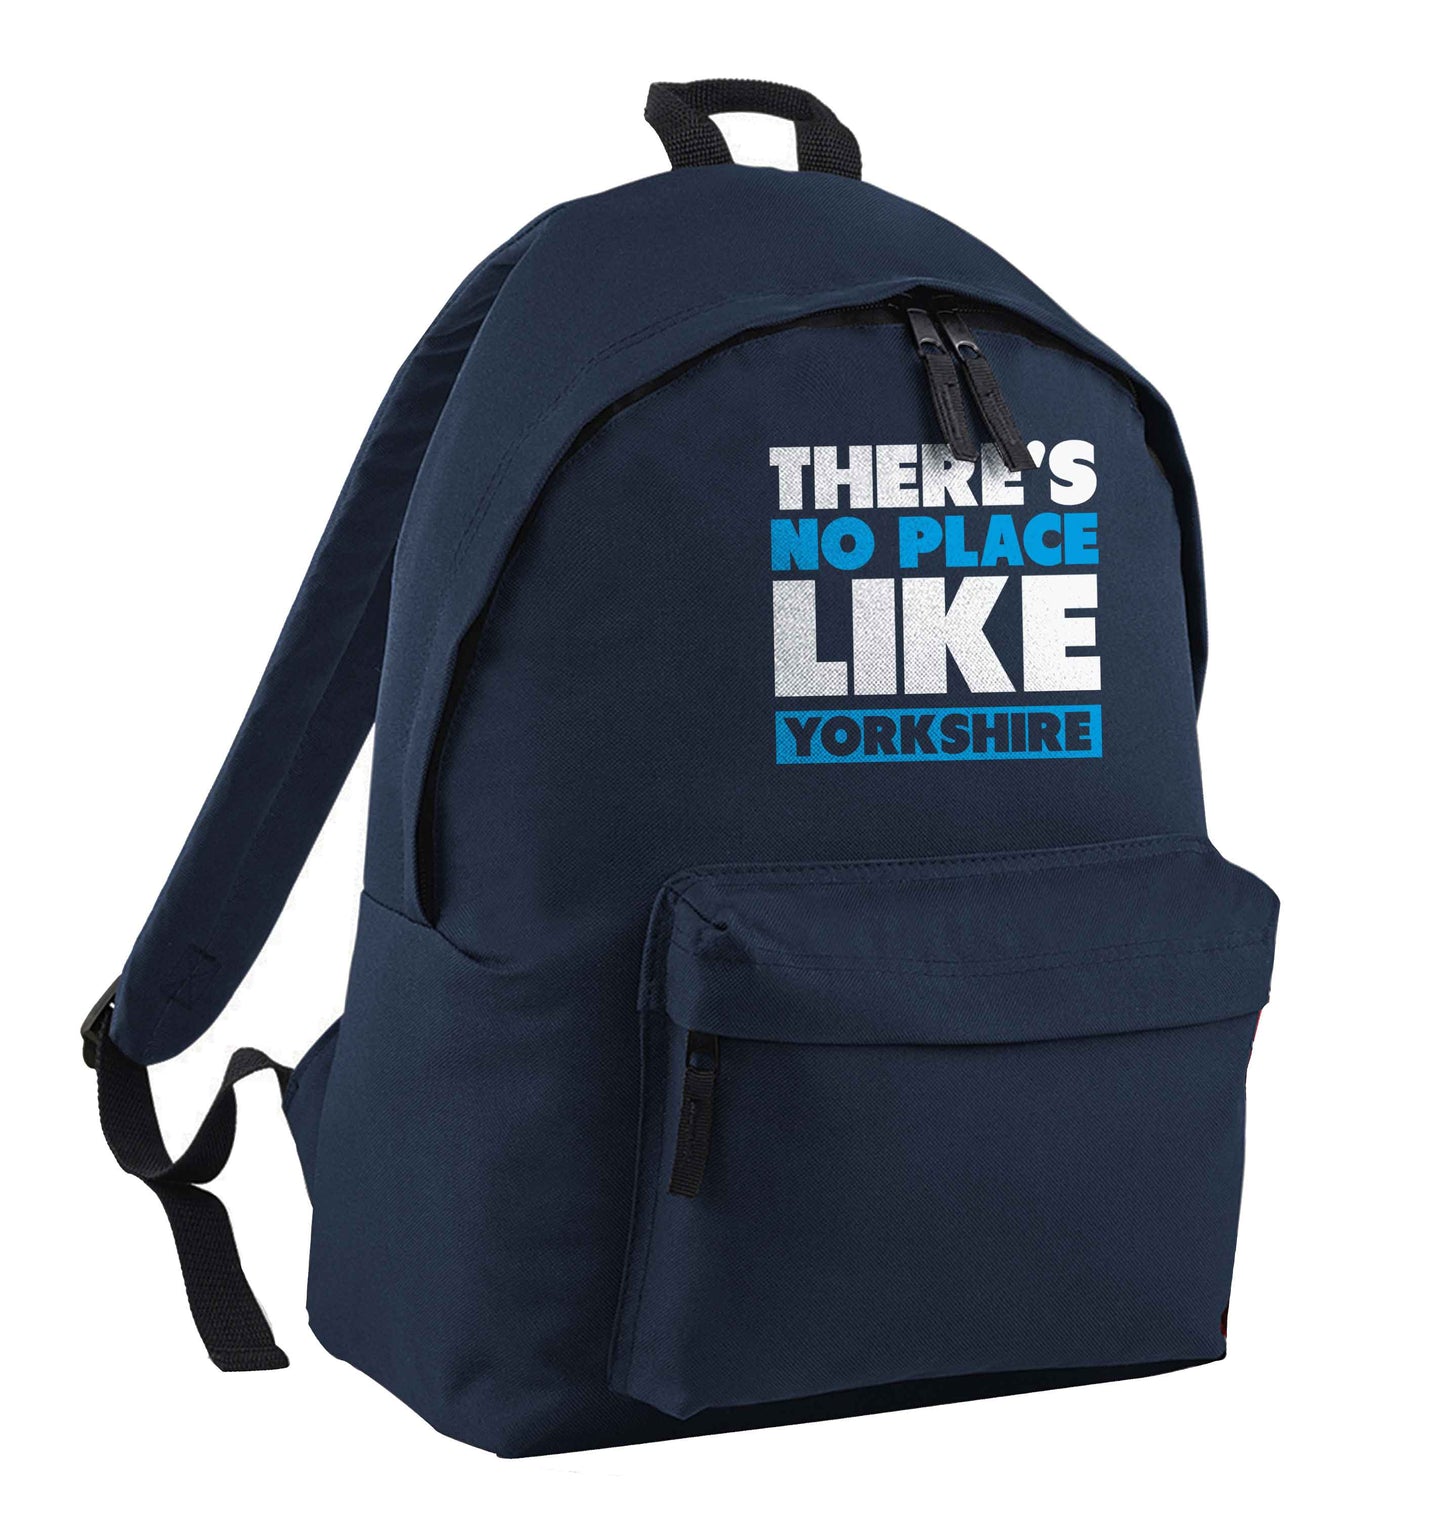 There's no place like Yorkshire navy adults backpack